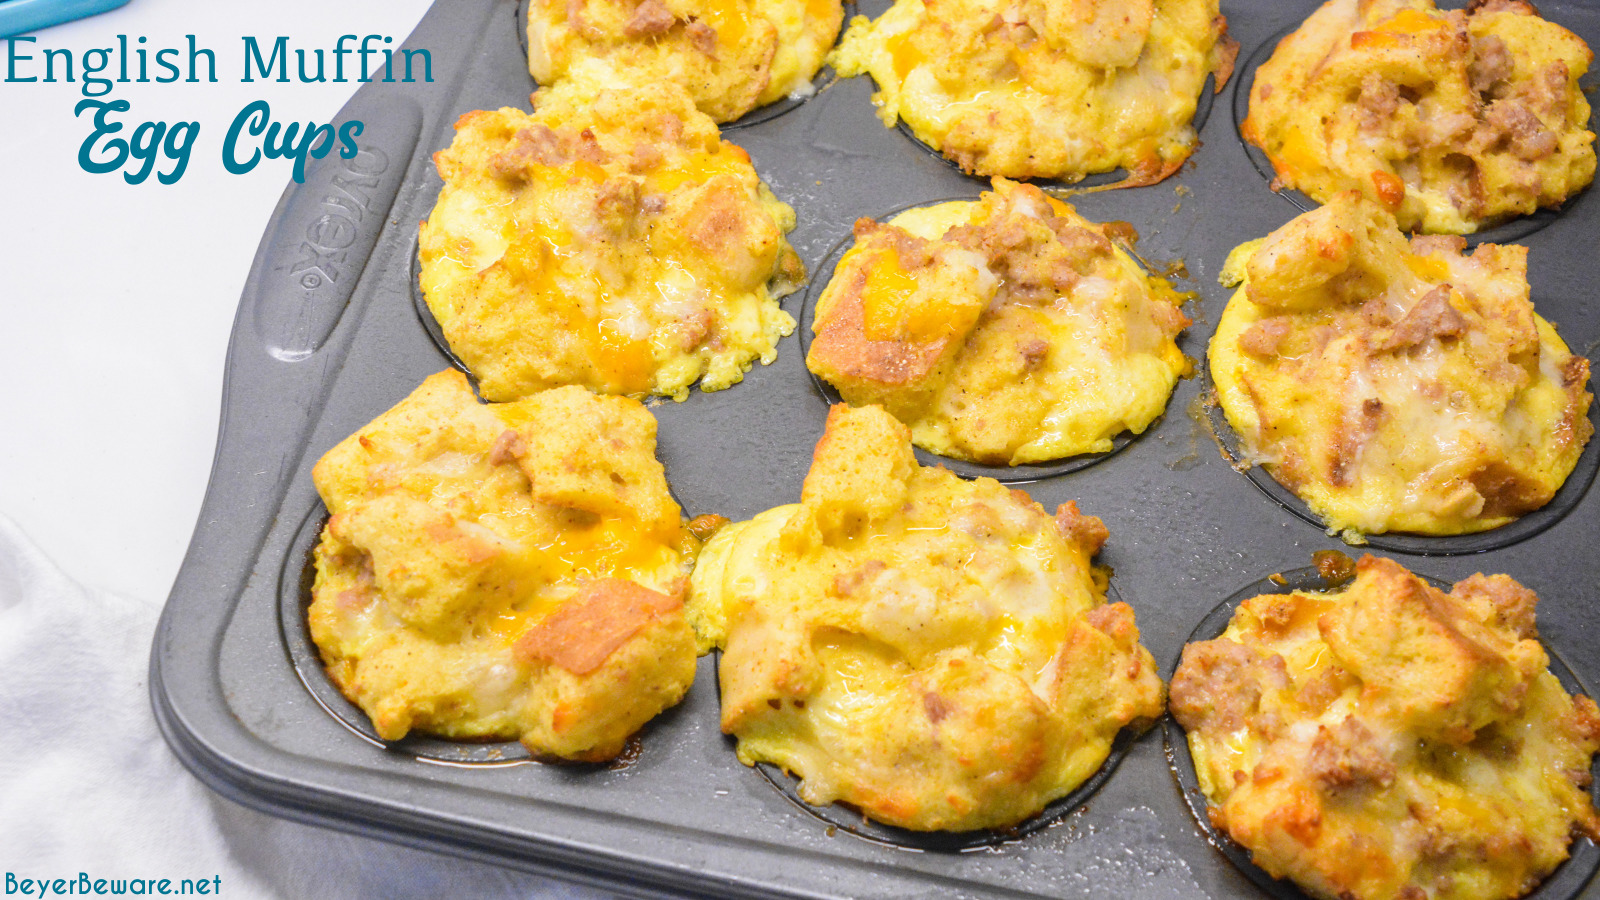 English Muffin Egg Cups are individual egg casseroles made from combining cubed English muffins, breakfast sausage, eggs, and cheese and then ready to eat, freezer, or fridge for quick breakfasts all week long.